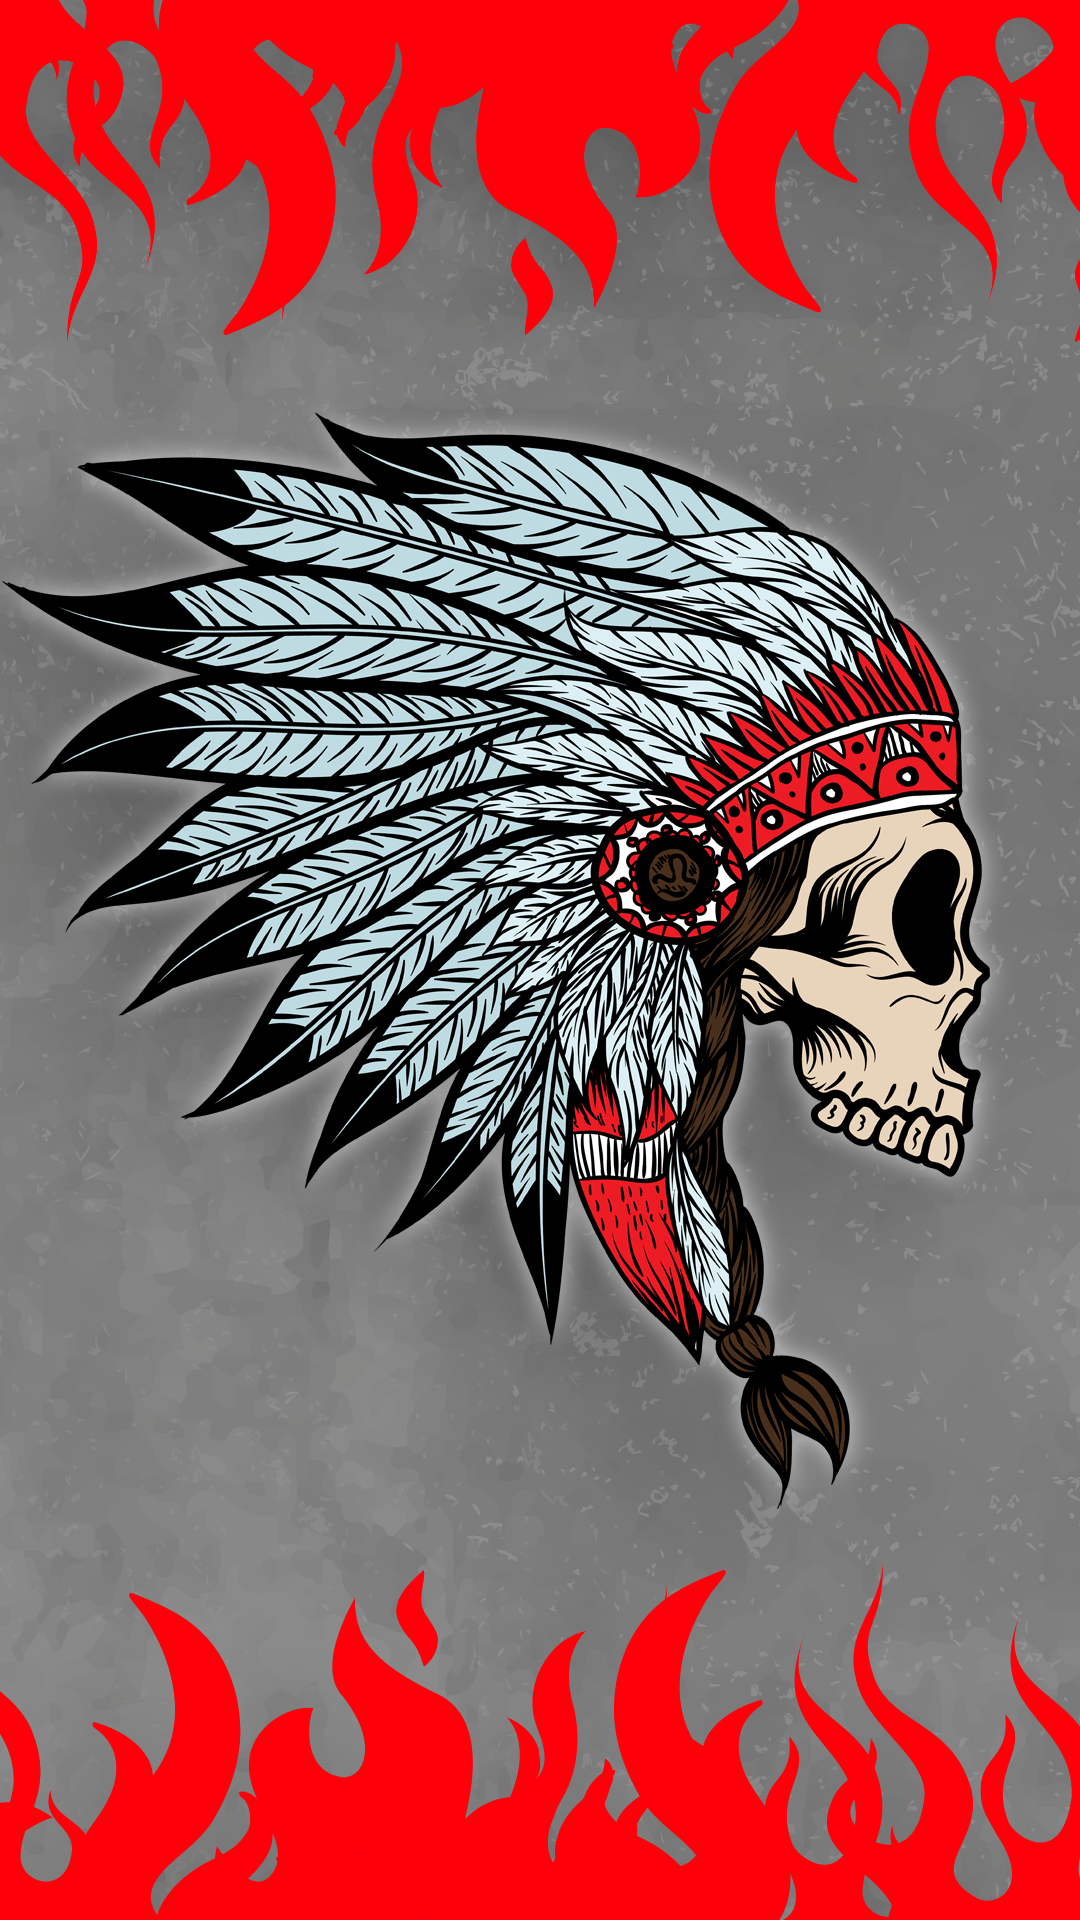 Download Our HD Indian Skull Wallpaper For Android Phones .0141